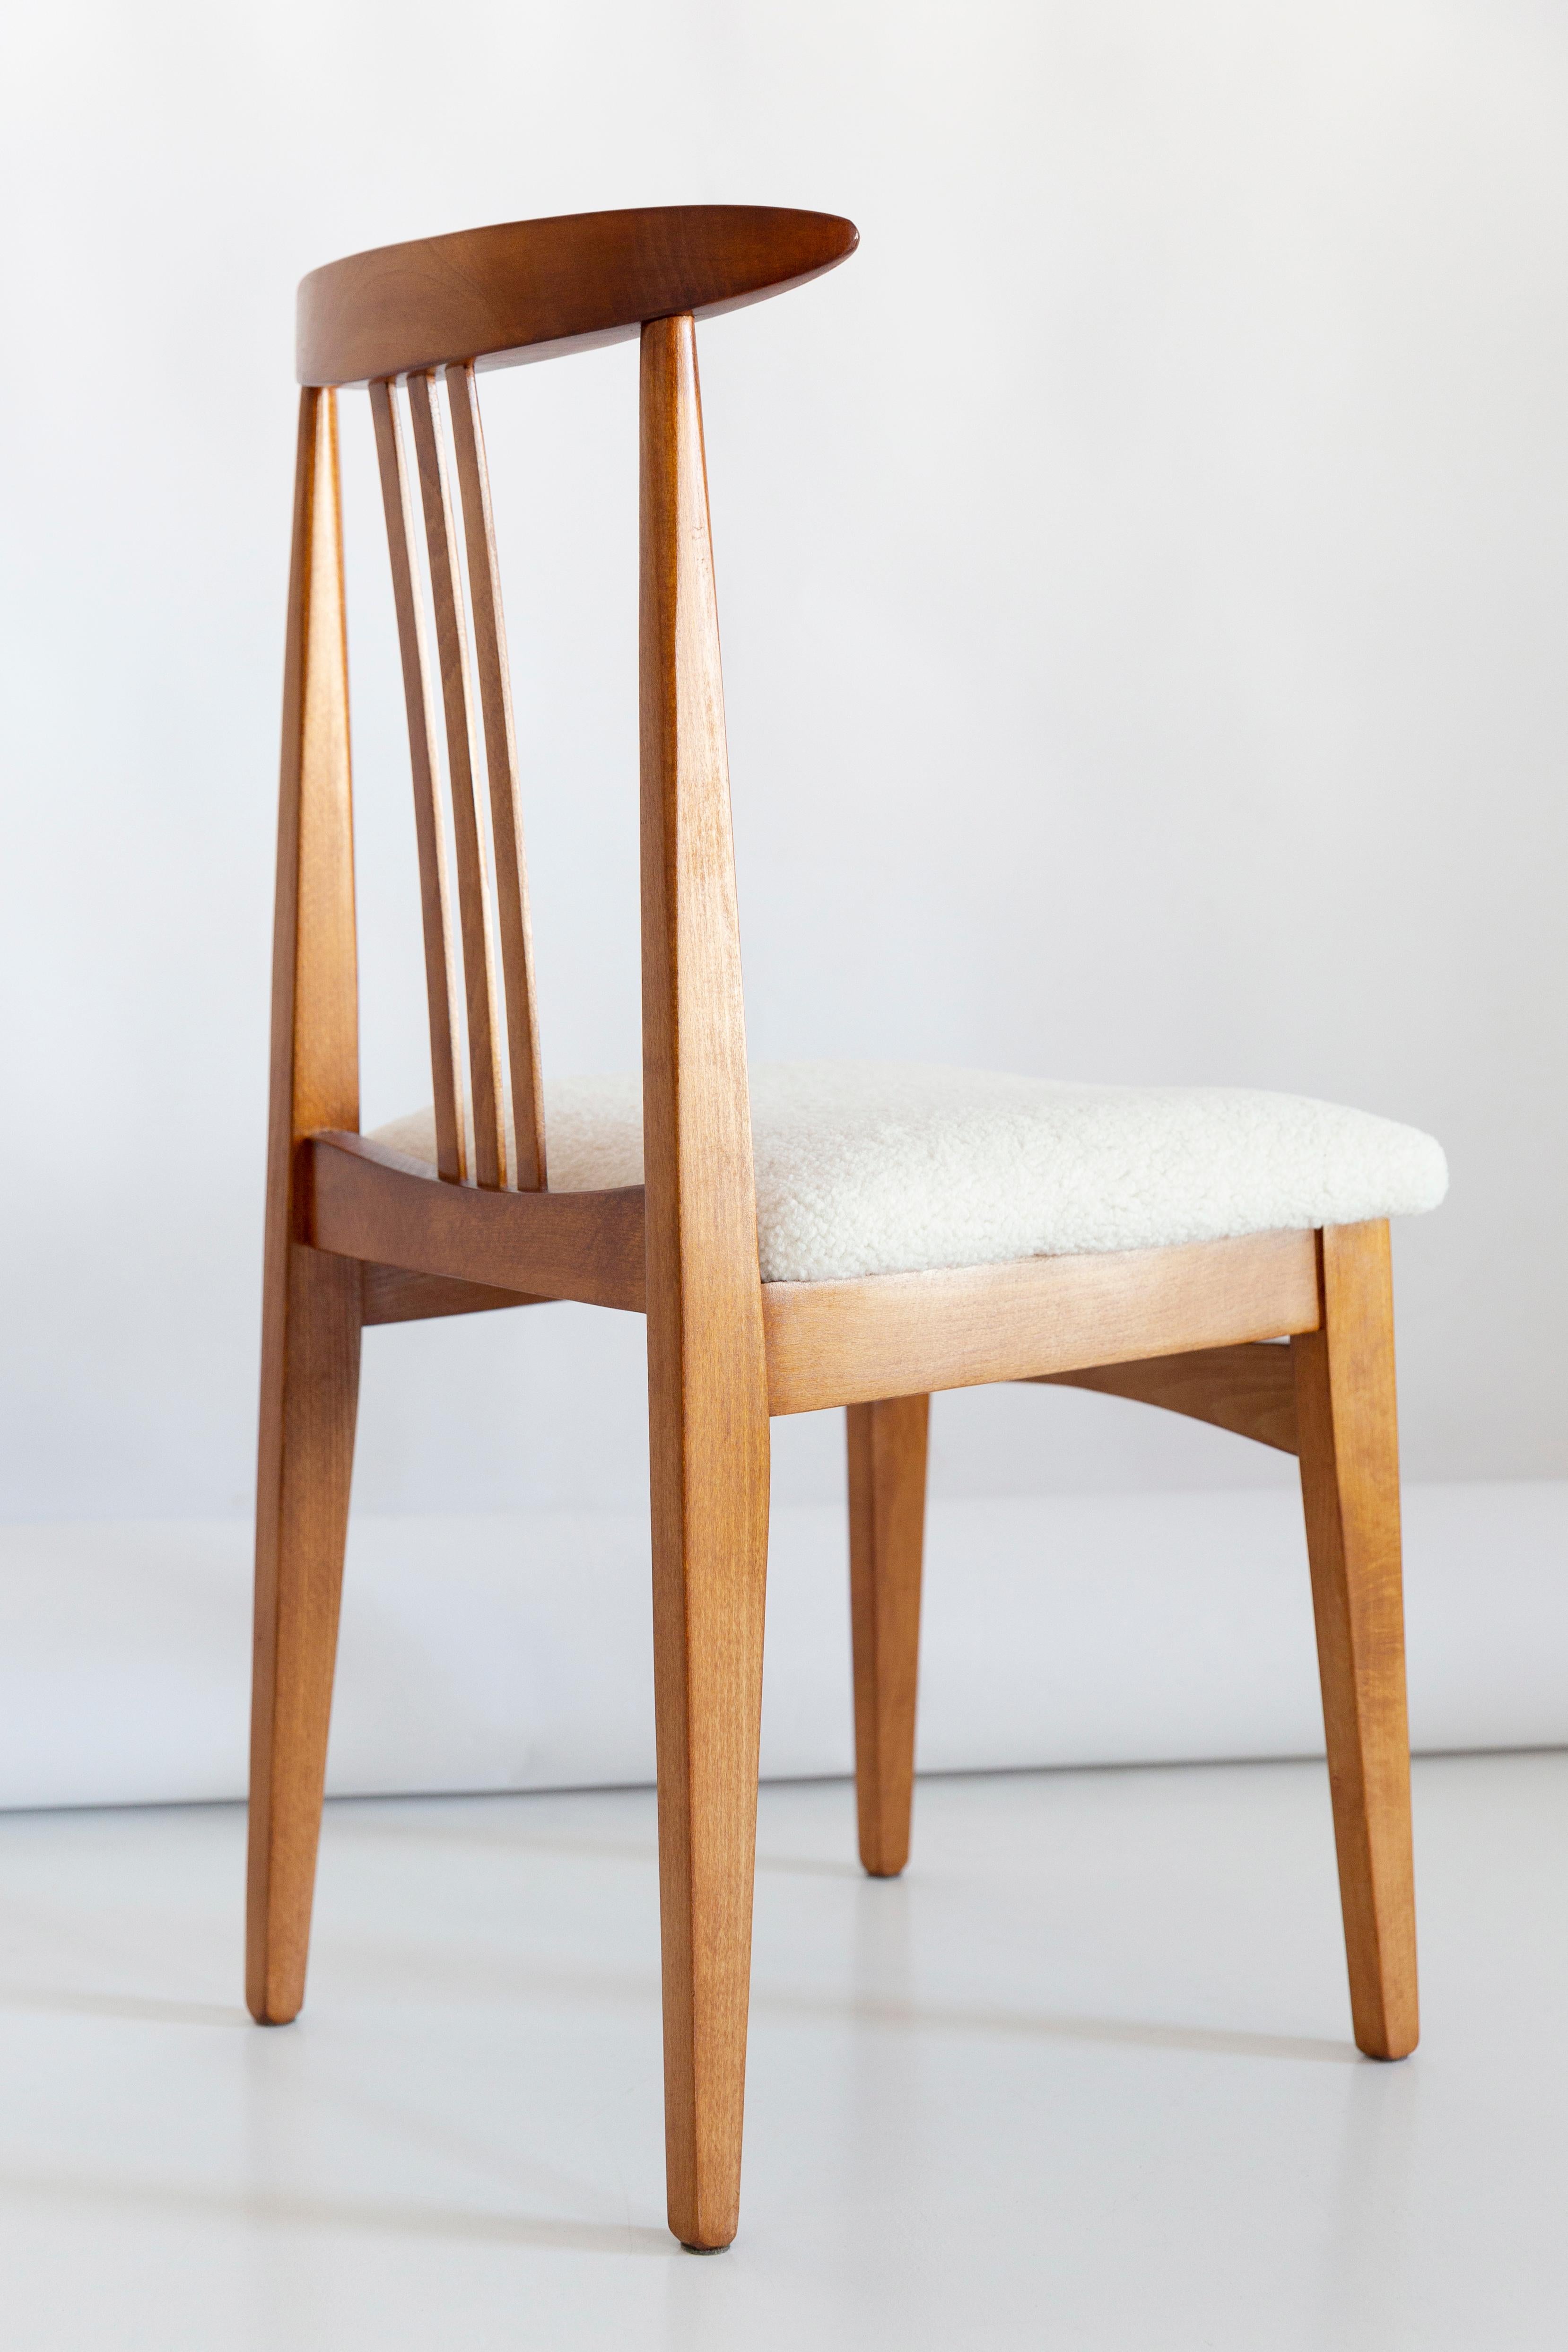 Eight Mid-Century Light Boucle Chair, Designed by M. Zielinski, Europe, 1960s For Sale 2